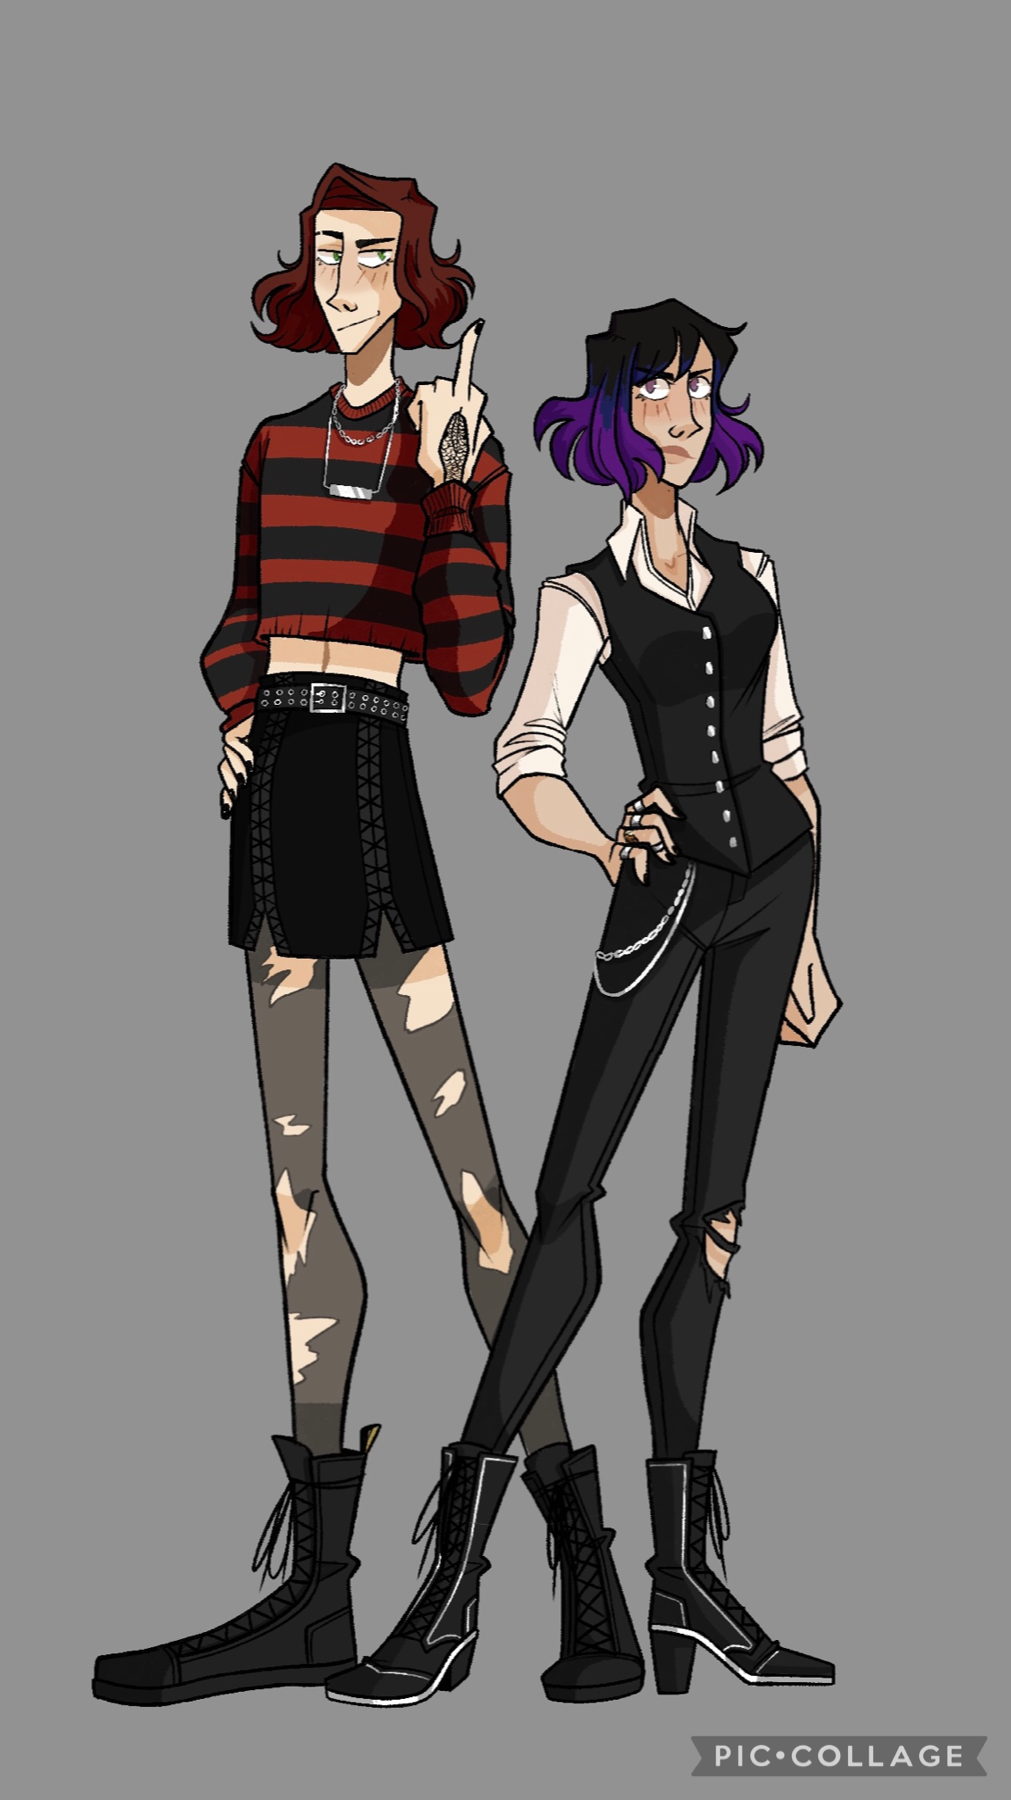 I don't know why Mal's legs look so flat but uhhh outfit swap